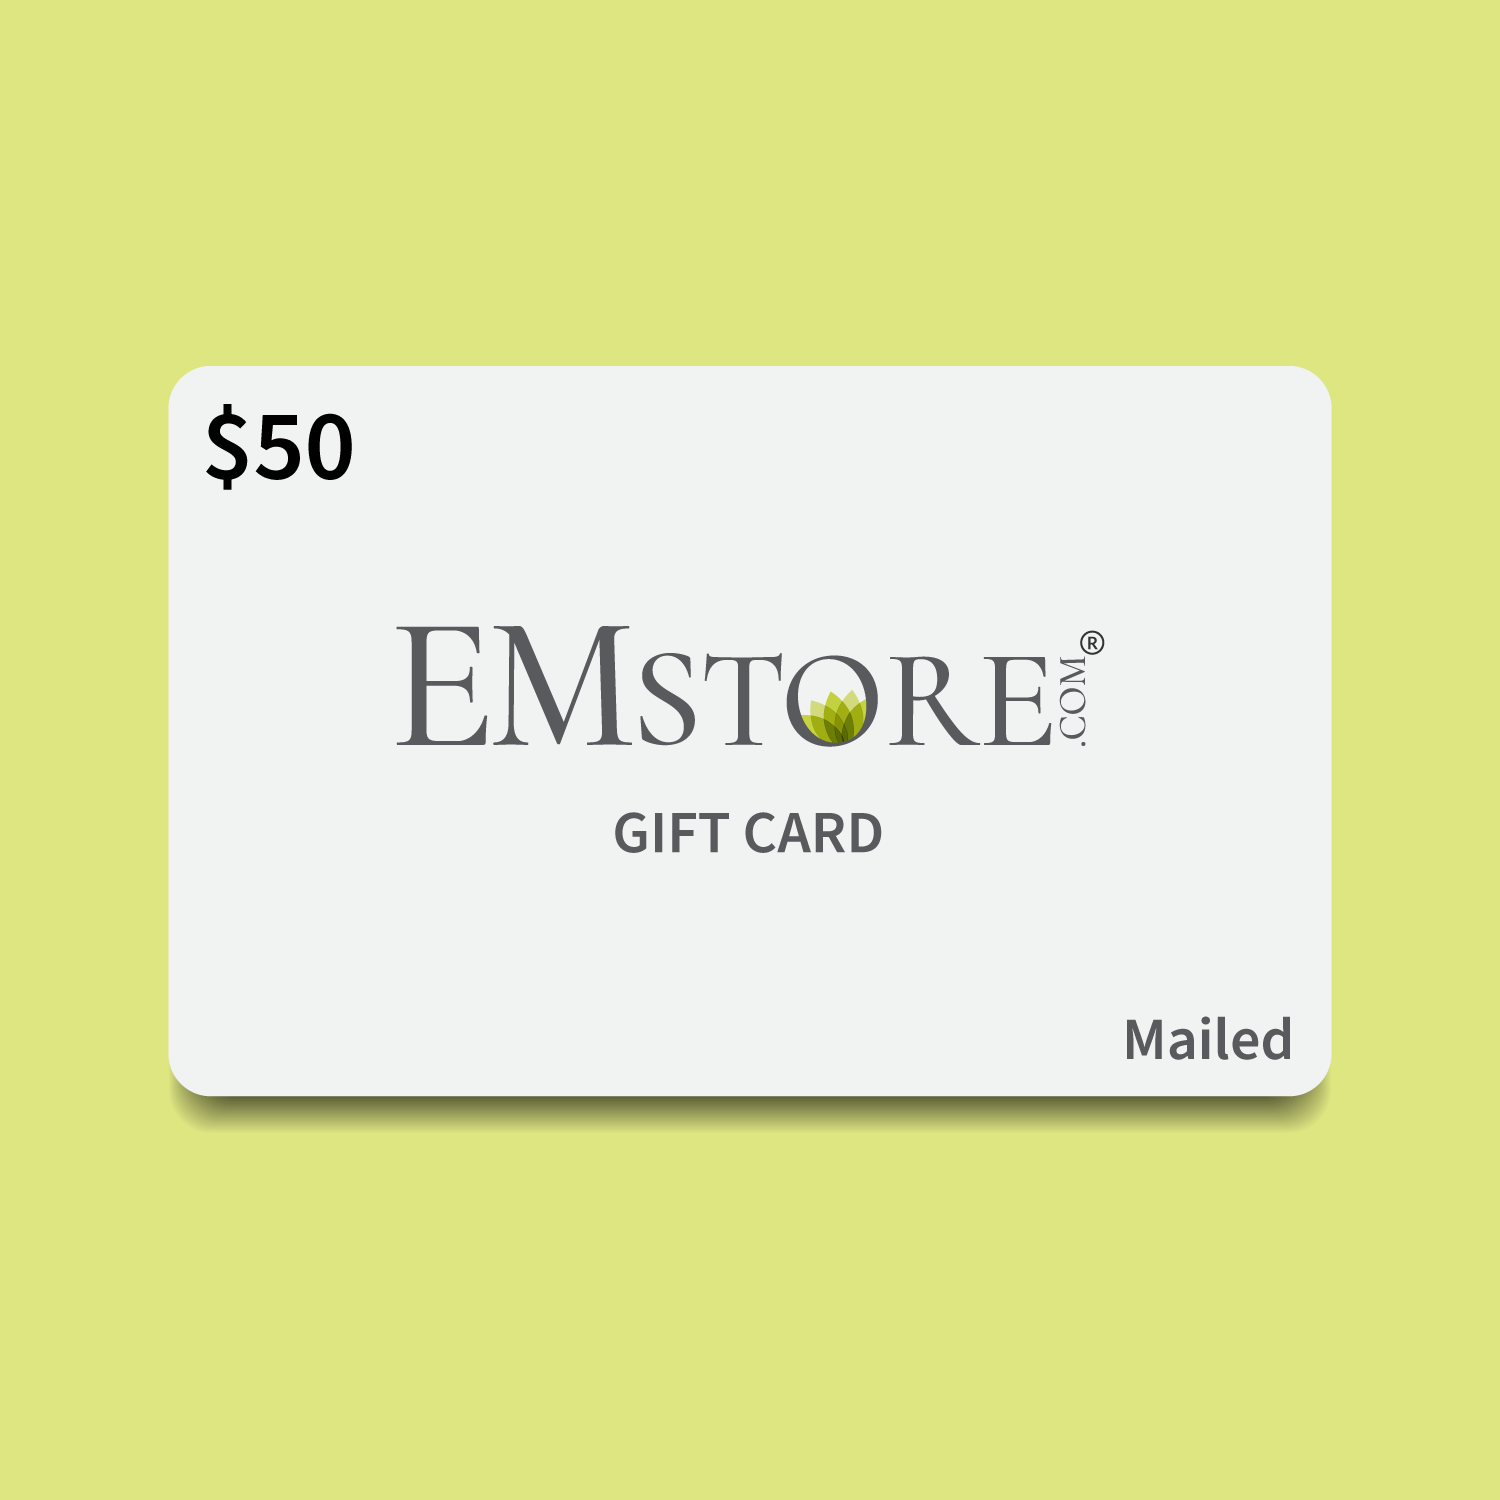 EMstore Gift Card (Mailed)